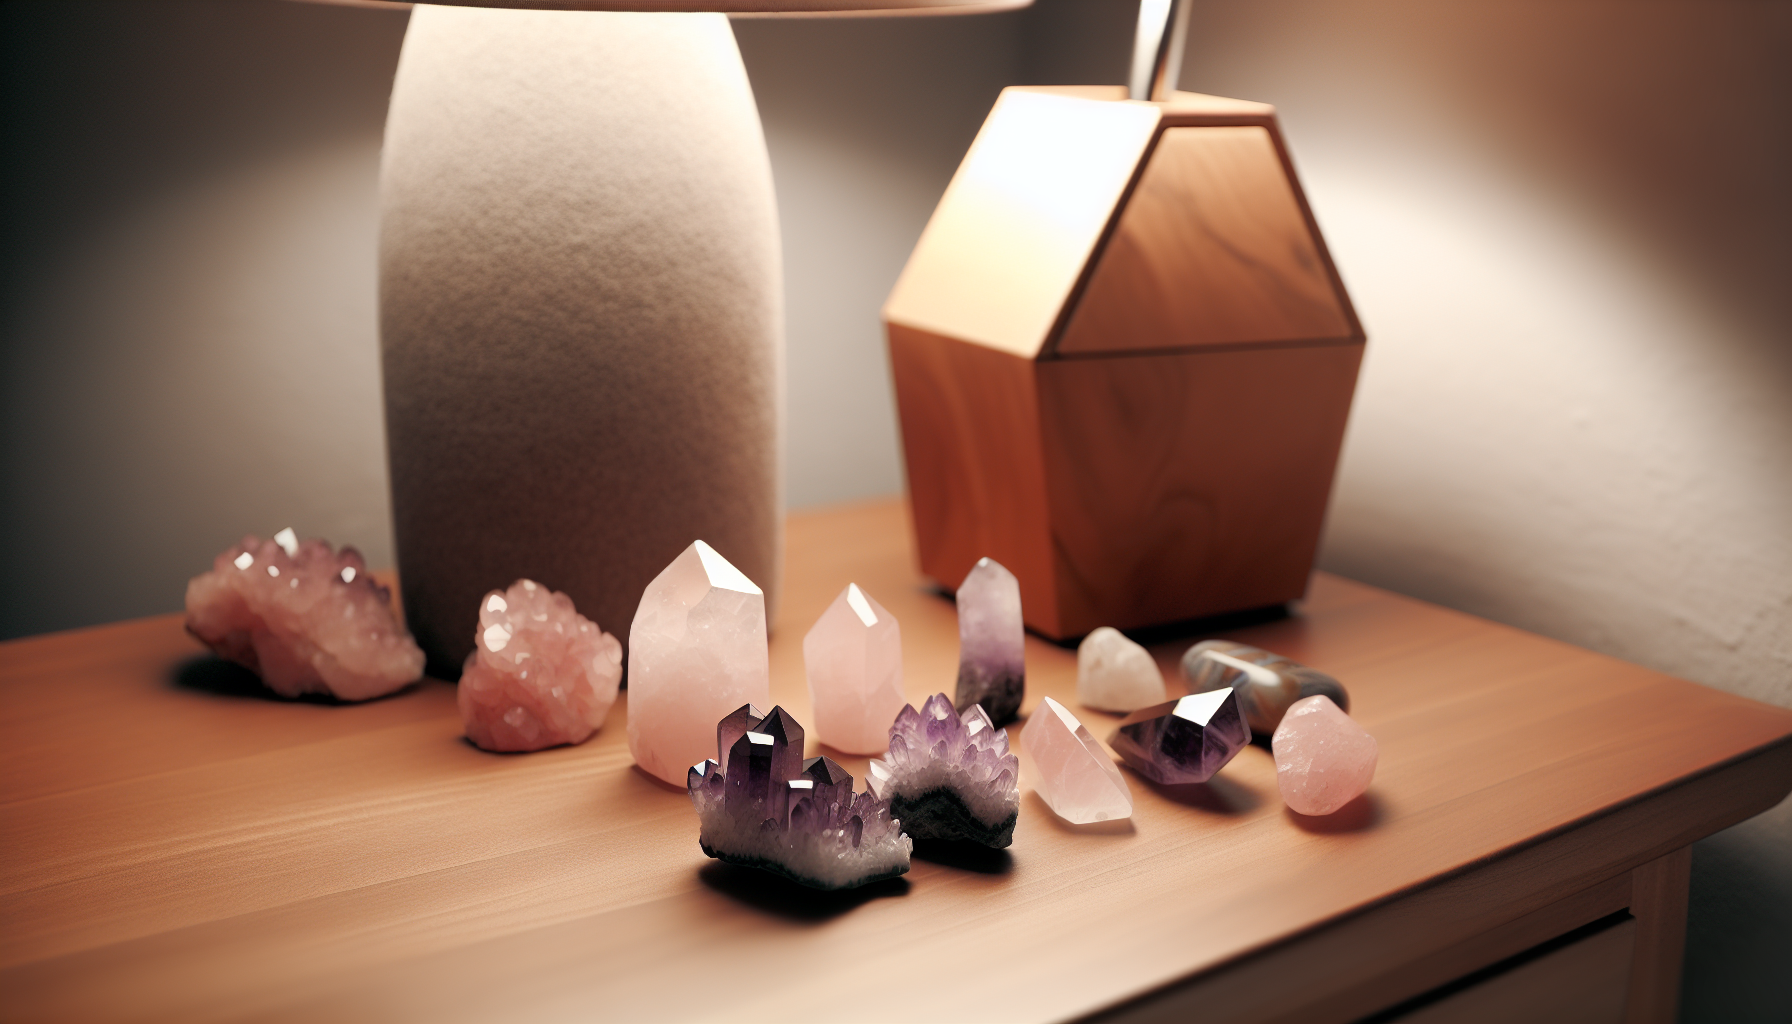 A variety of crystals including rose quartz and amethyst